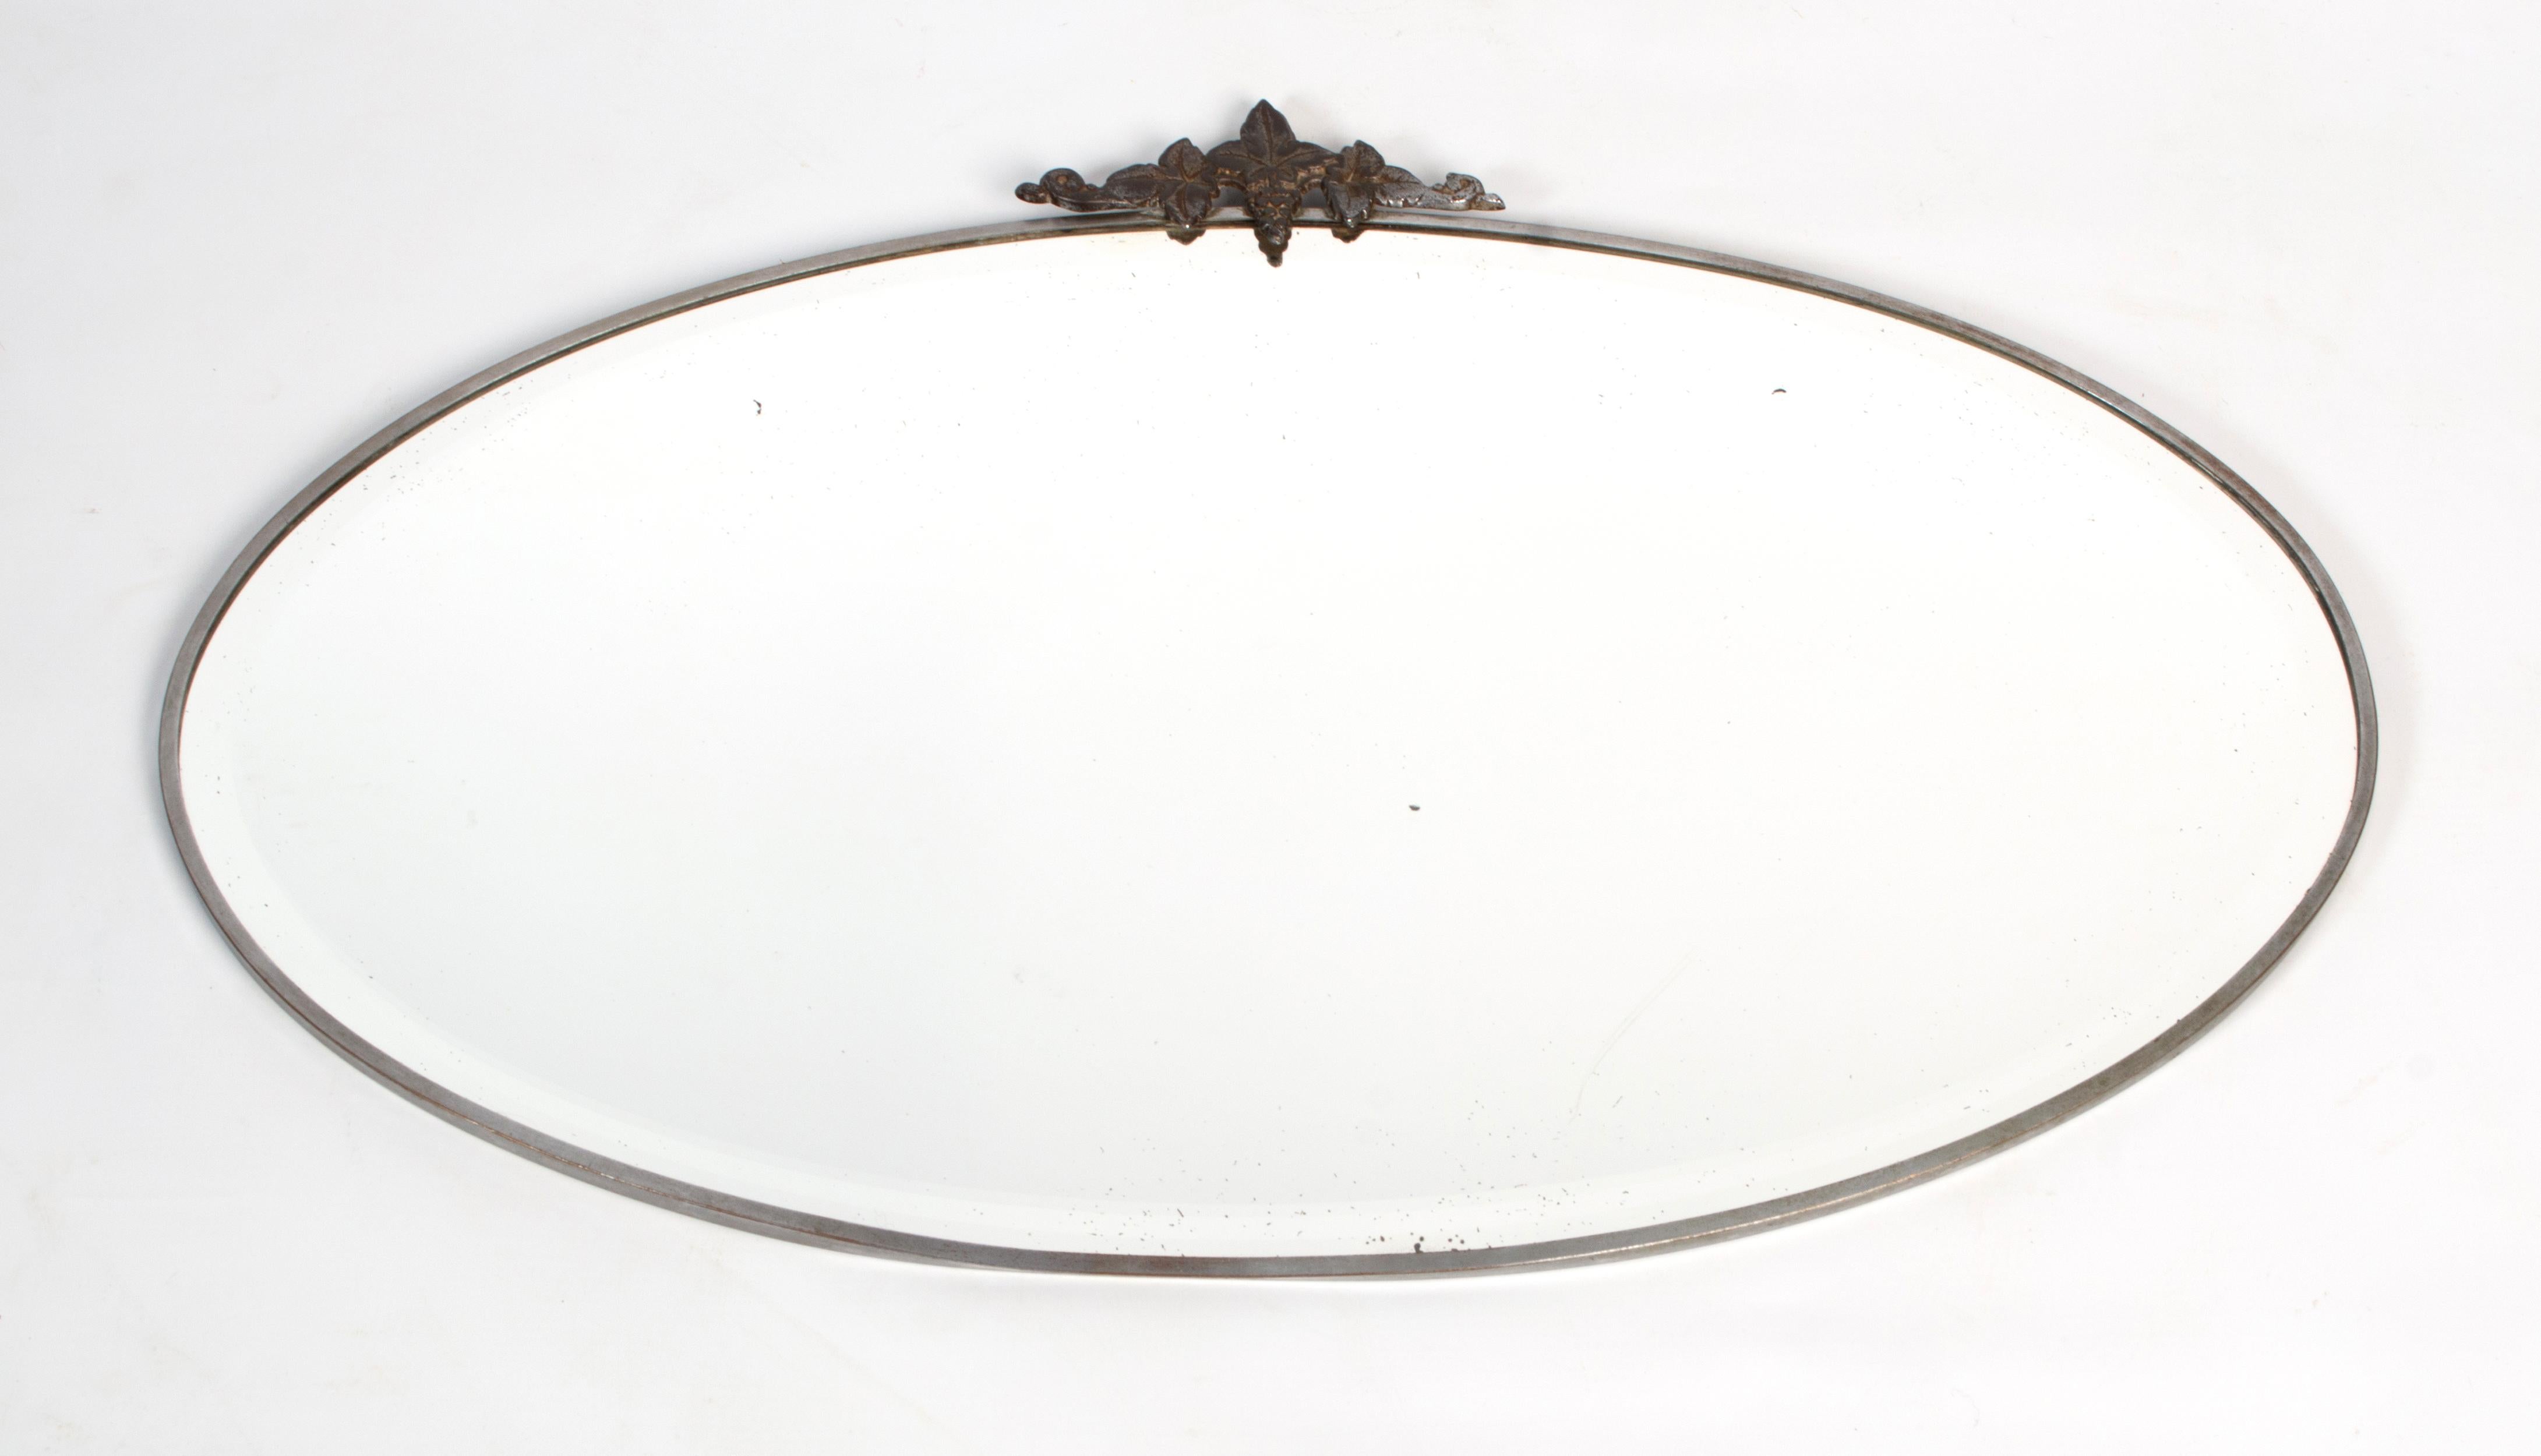 Antique French Art Deco Nickel framed oval mirror, circa 1920

Nickel framed original bevelled mirror.
Good condition commensurate of age. A light scratch to mirror visible in certain light (Bottom central right) - please refer to photo.